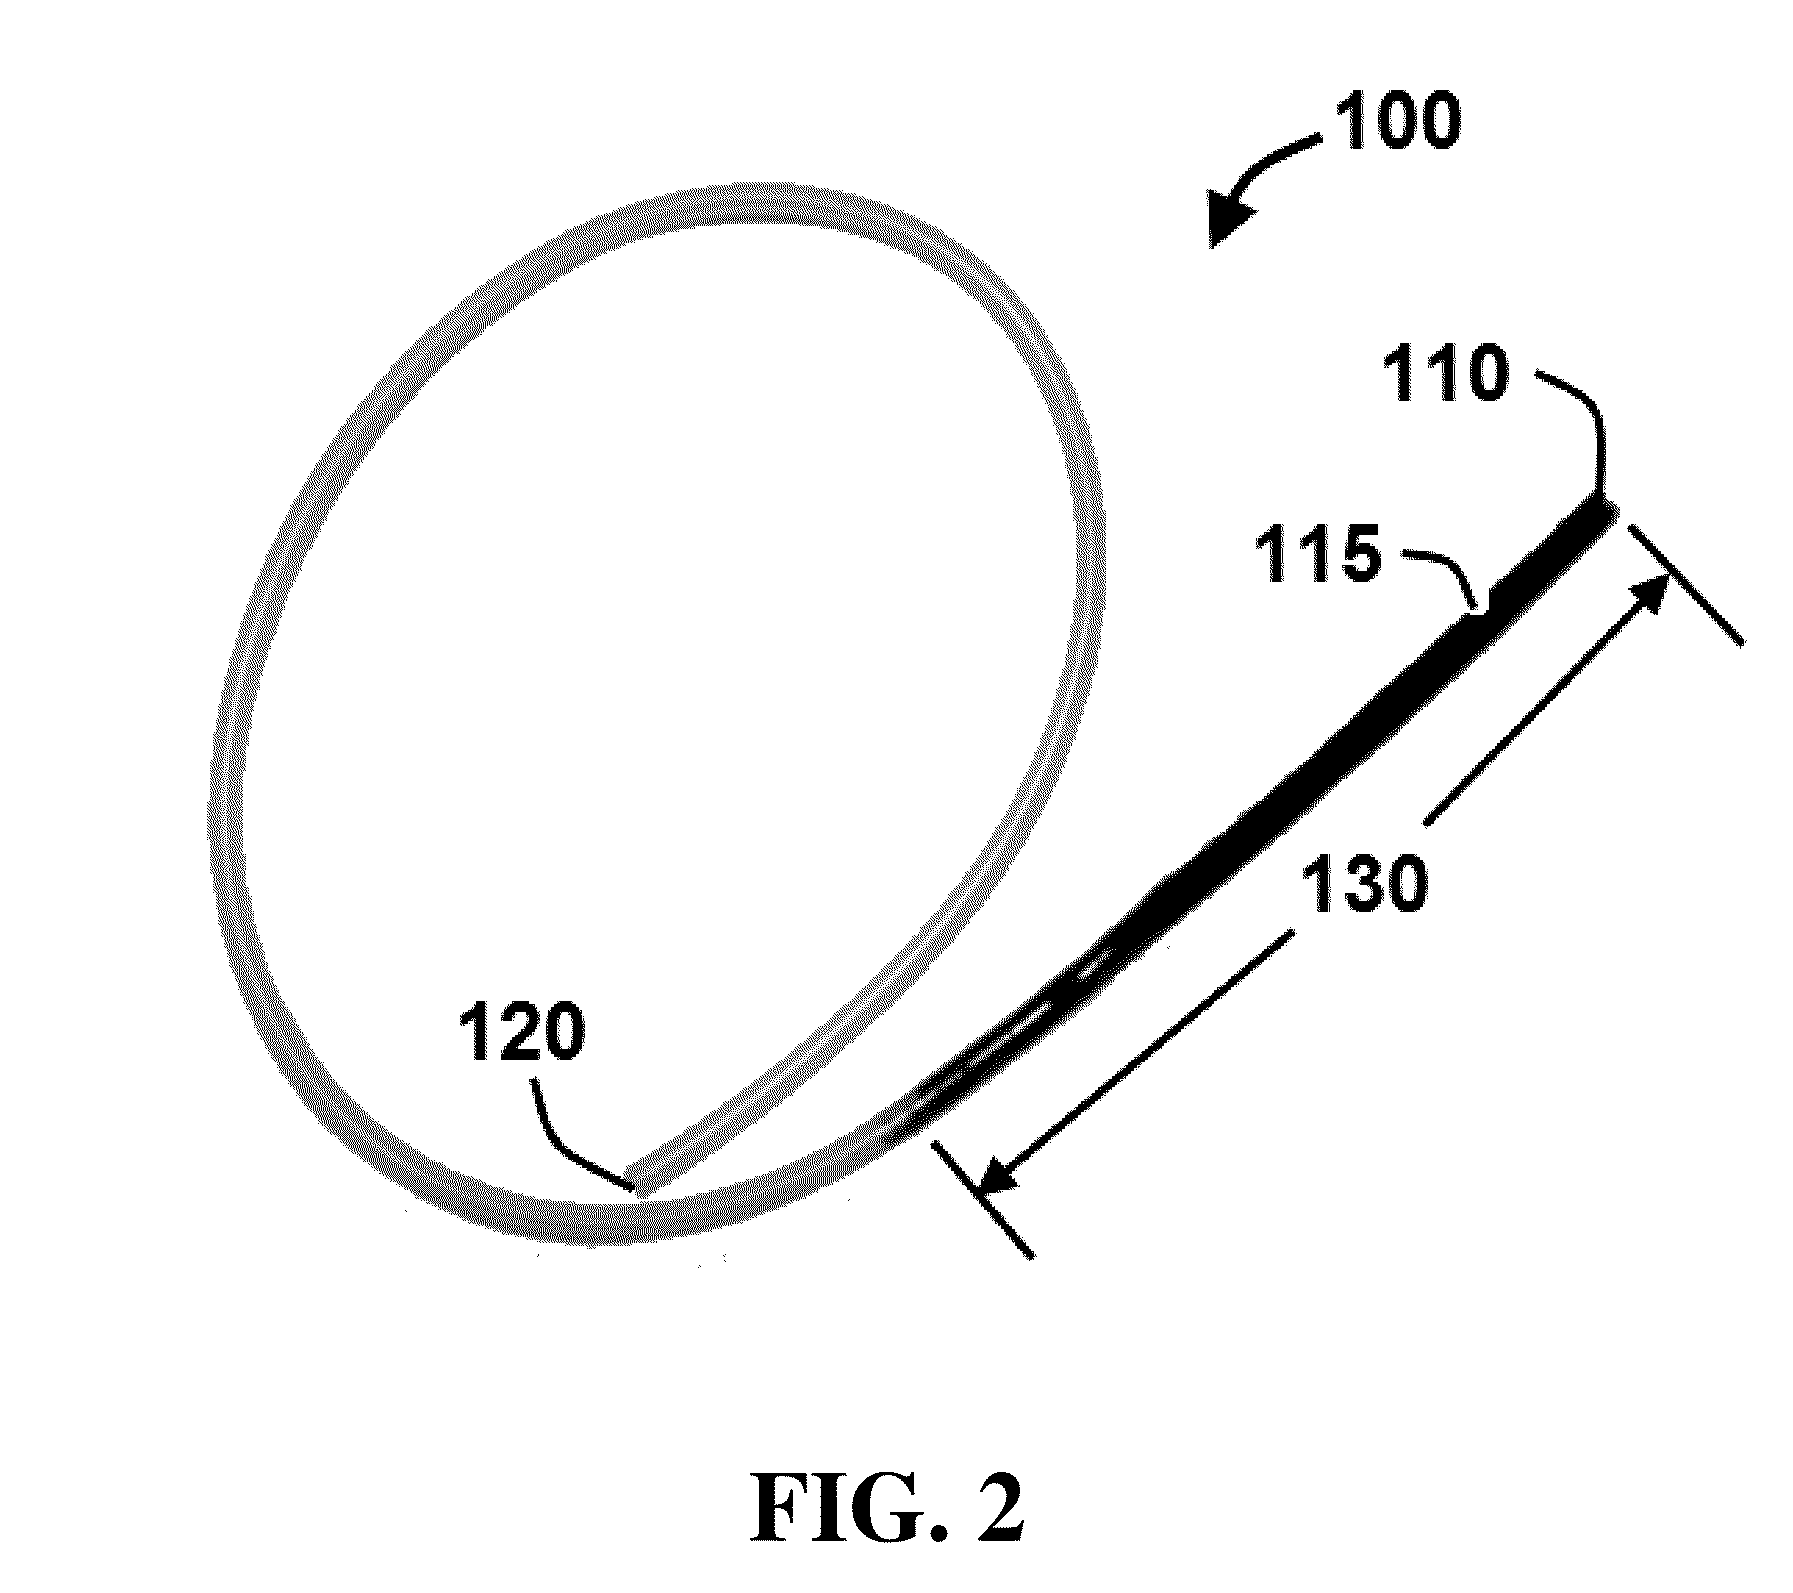 Method and System for Sustained-Release of Sclerosing Agent